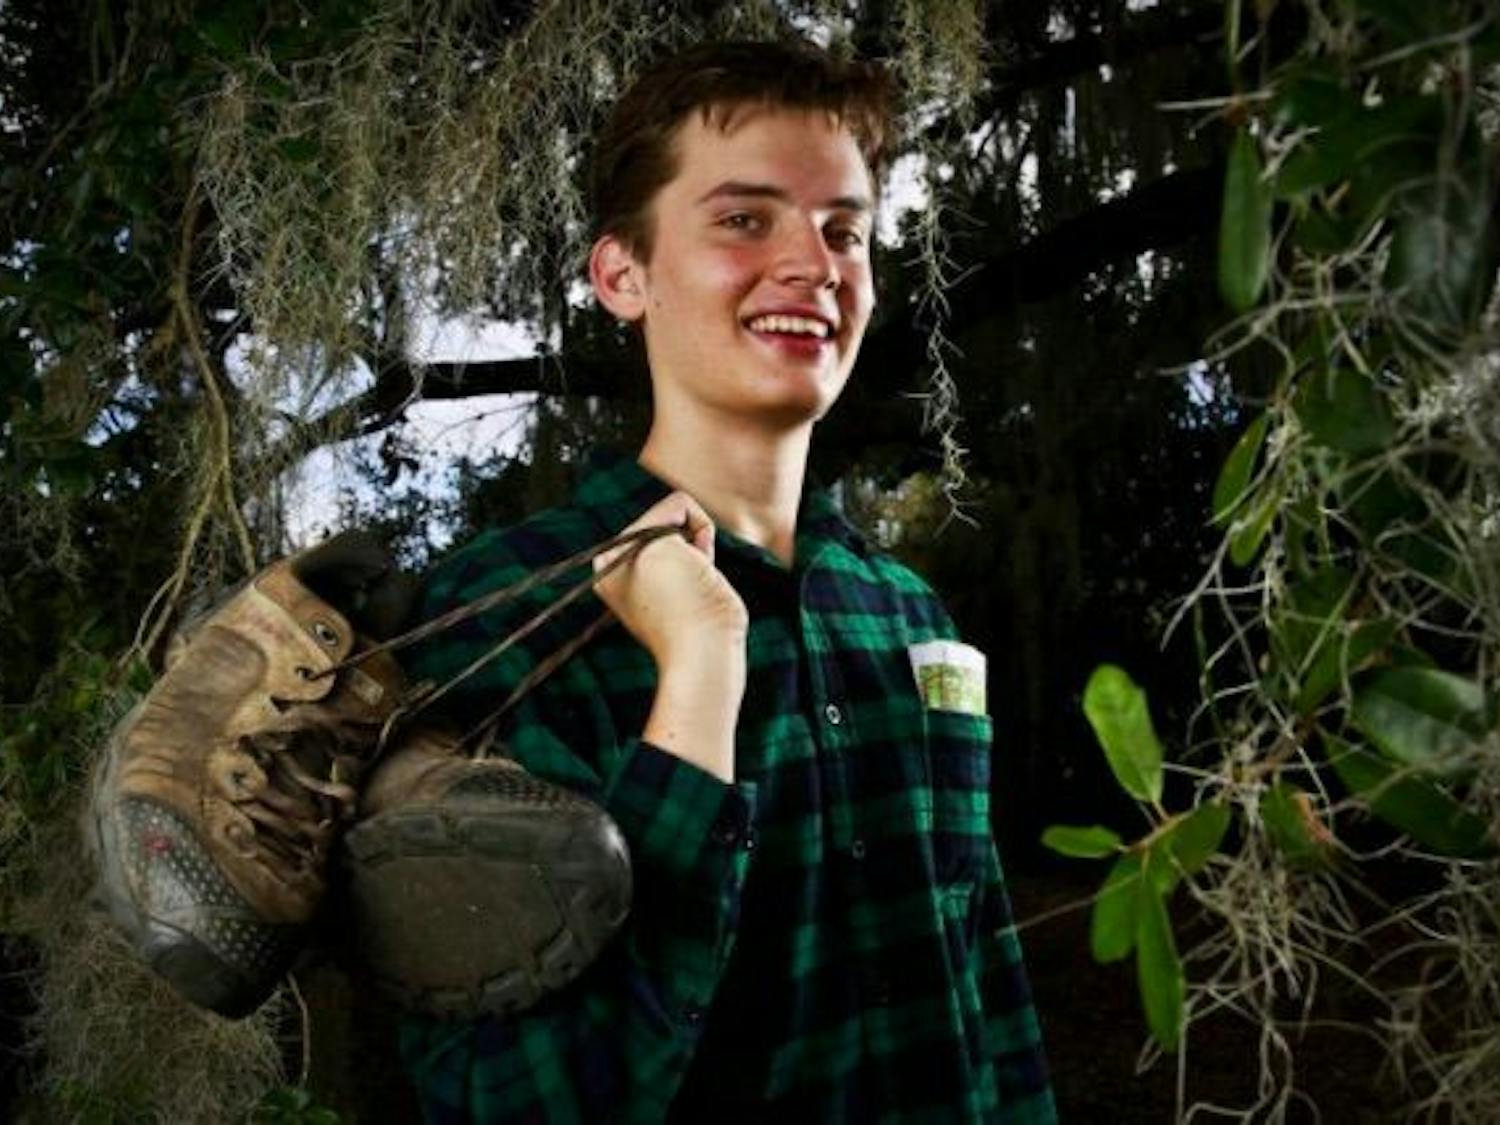 Oscar Psychas, 20, is suing the state of Florida with seven other people under 21 to advocate for better environmental practices. He hiked 300 miles last February to raise awareness for conservation of Florida’s wild areas.